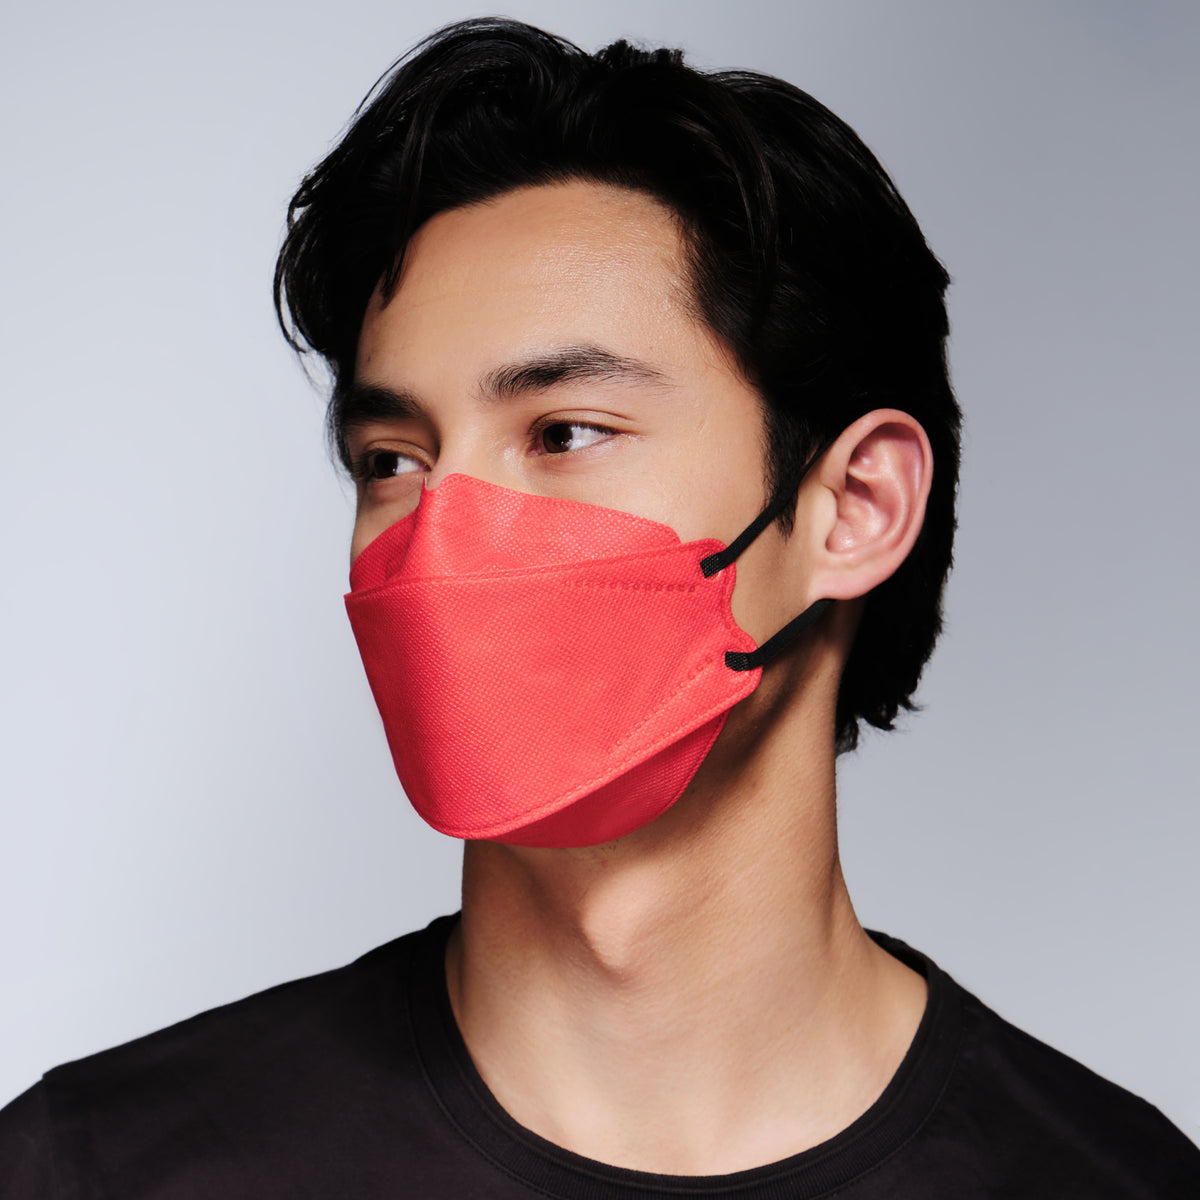 KN95 Respirator Face Mask - Red